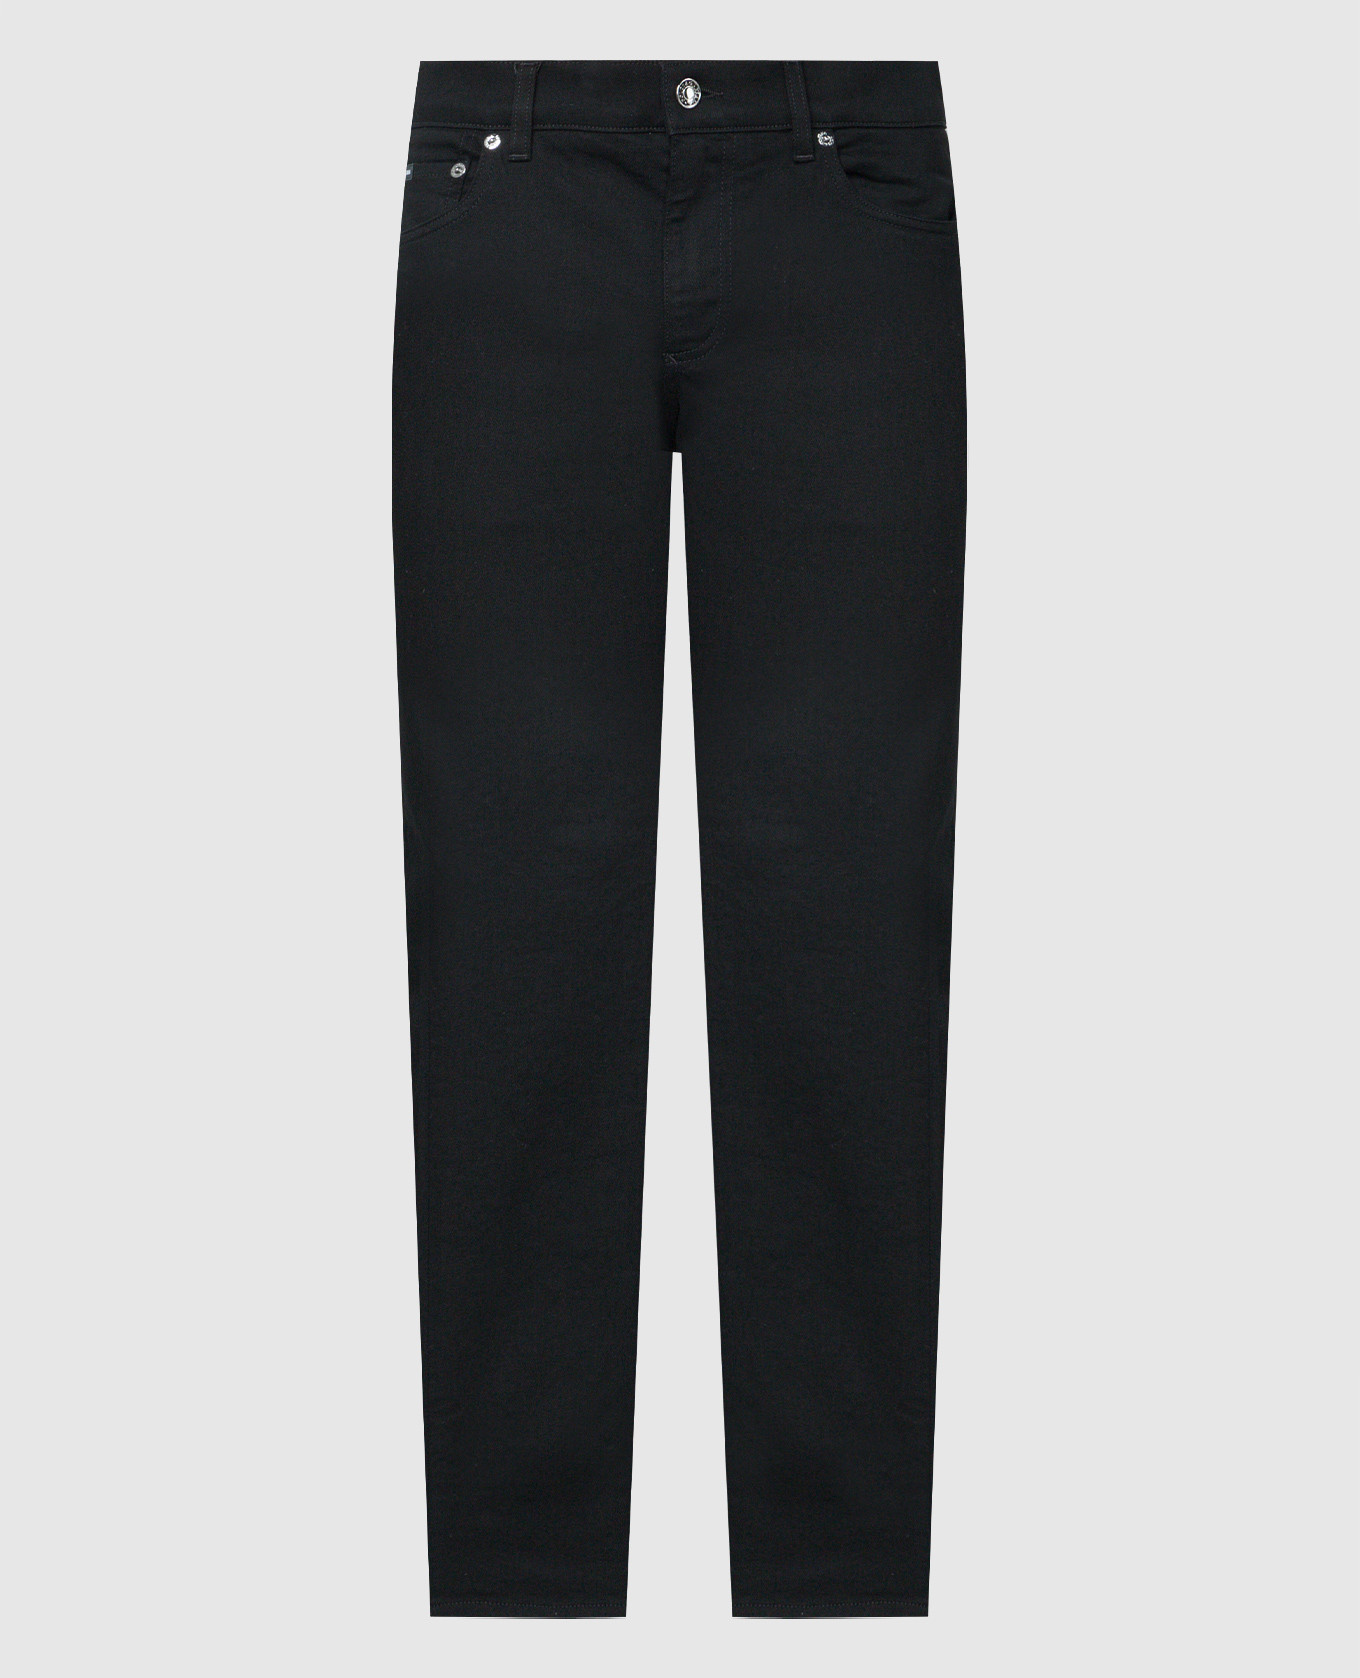 Black jeans with logo patch